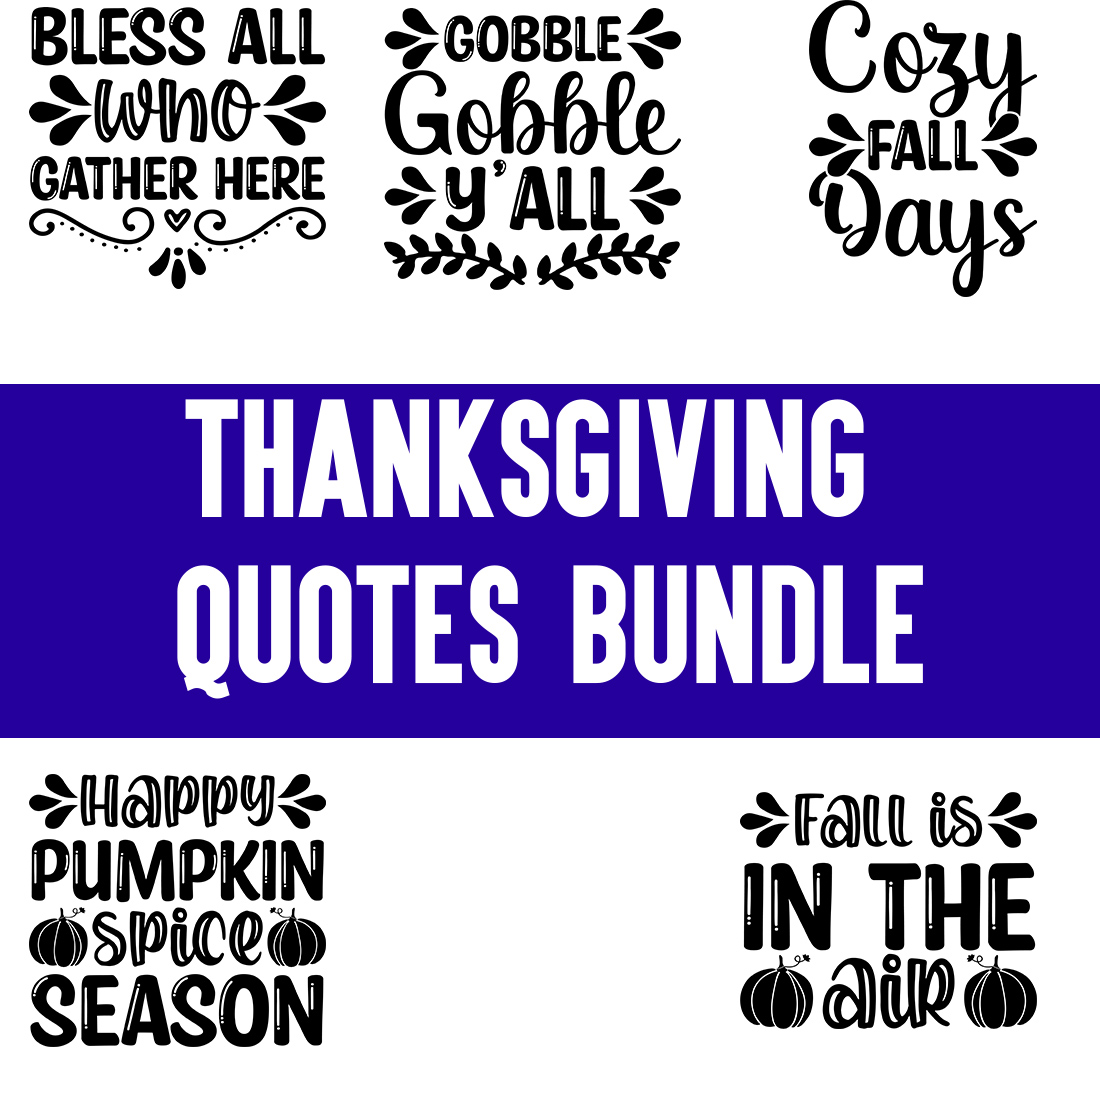 Thanksgiving Quotes Bundle preview image.